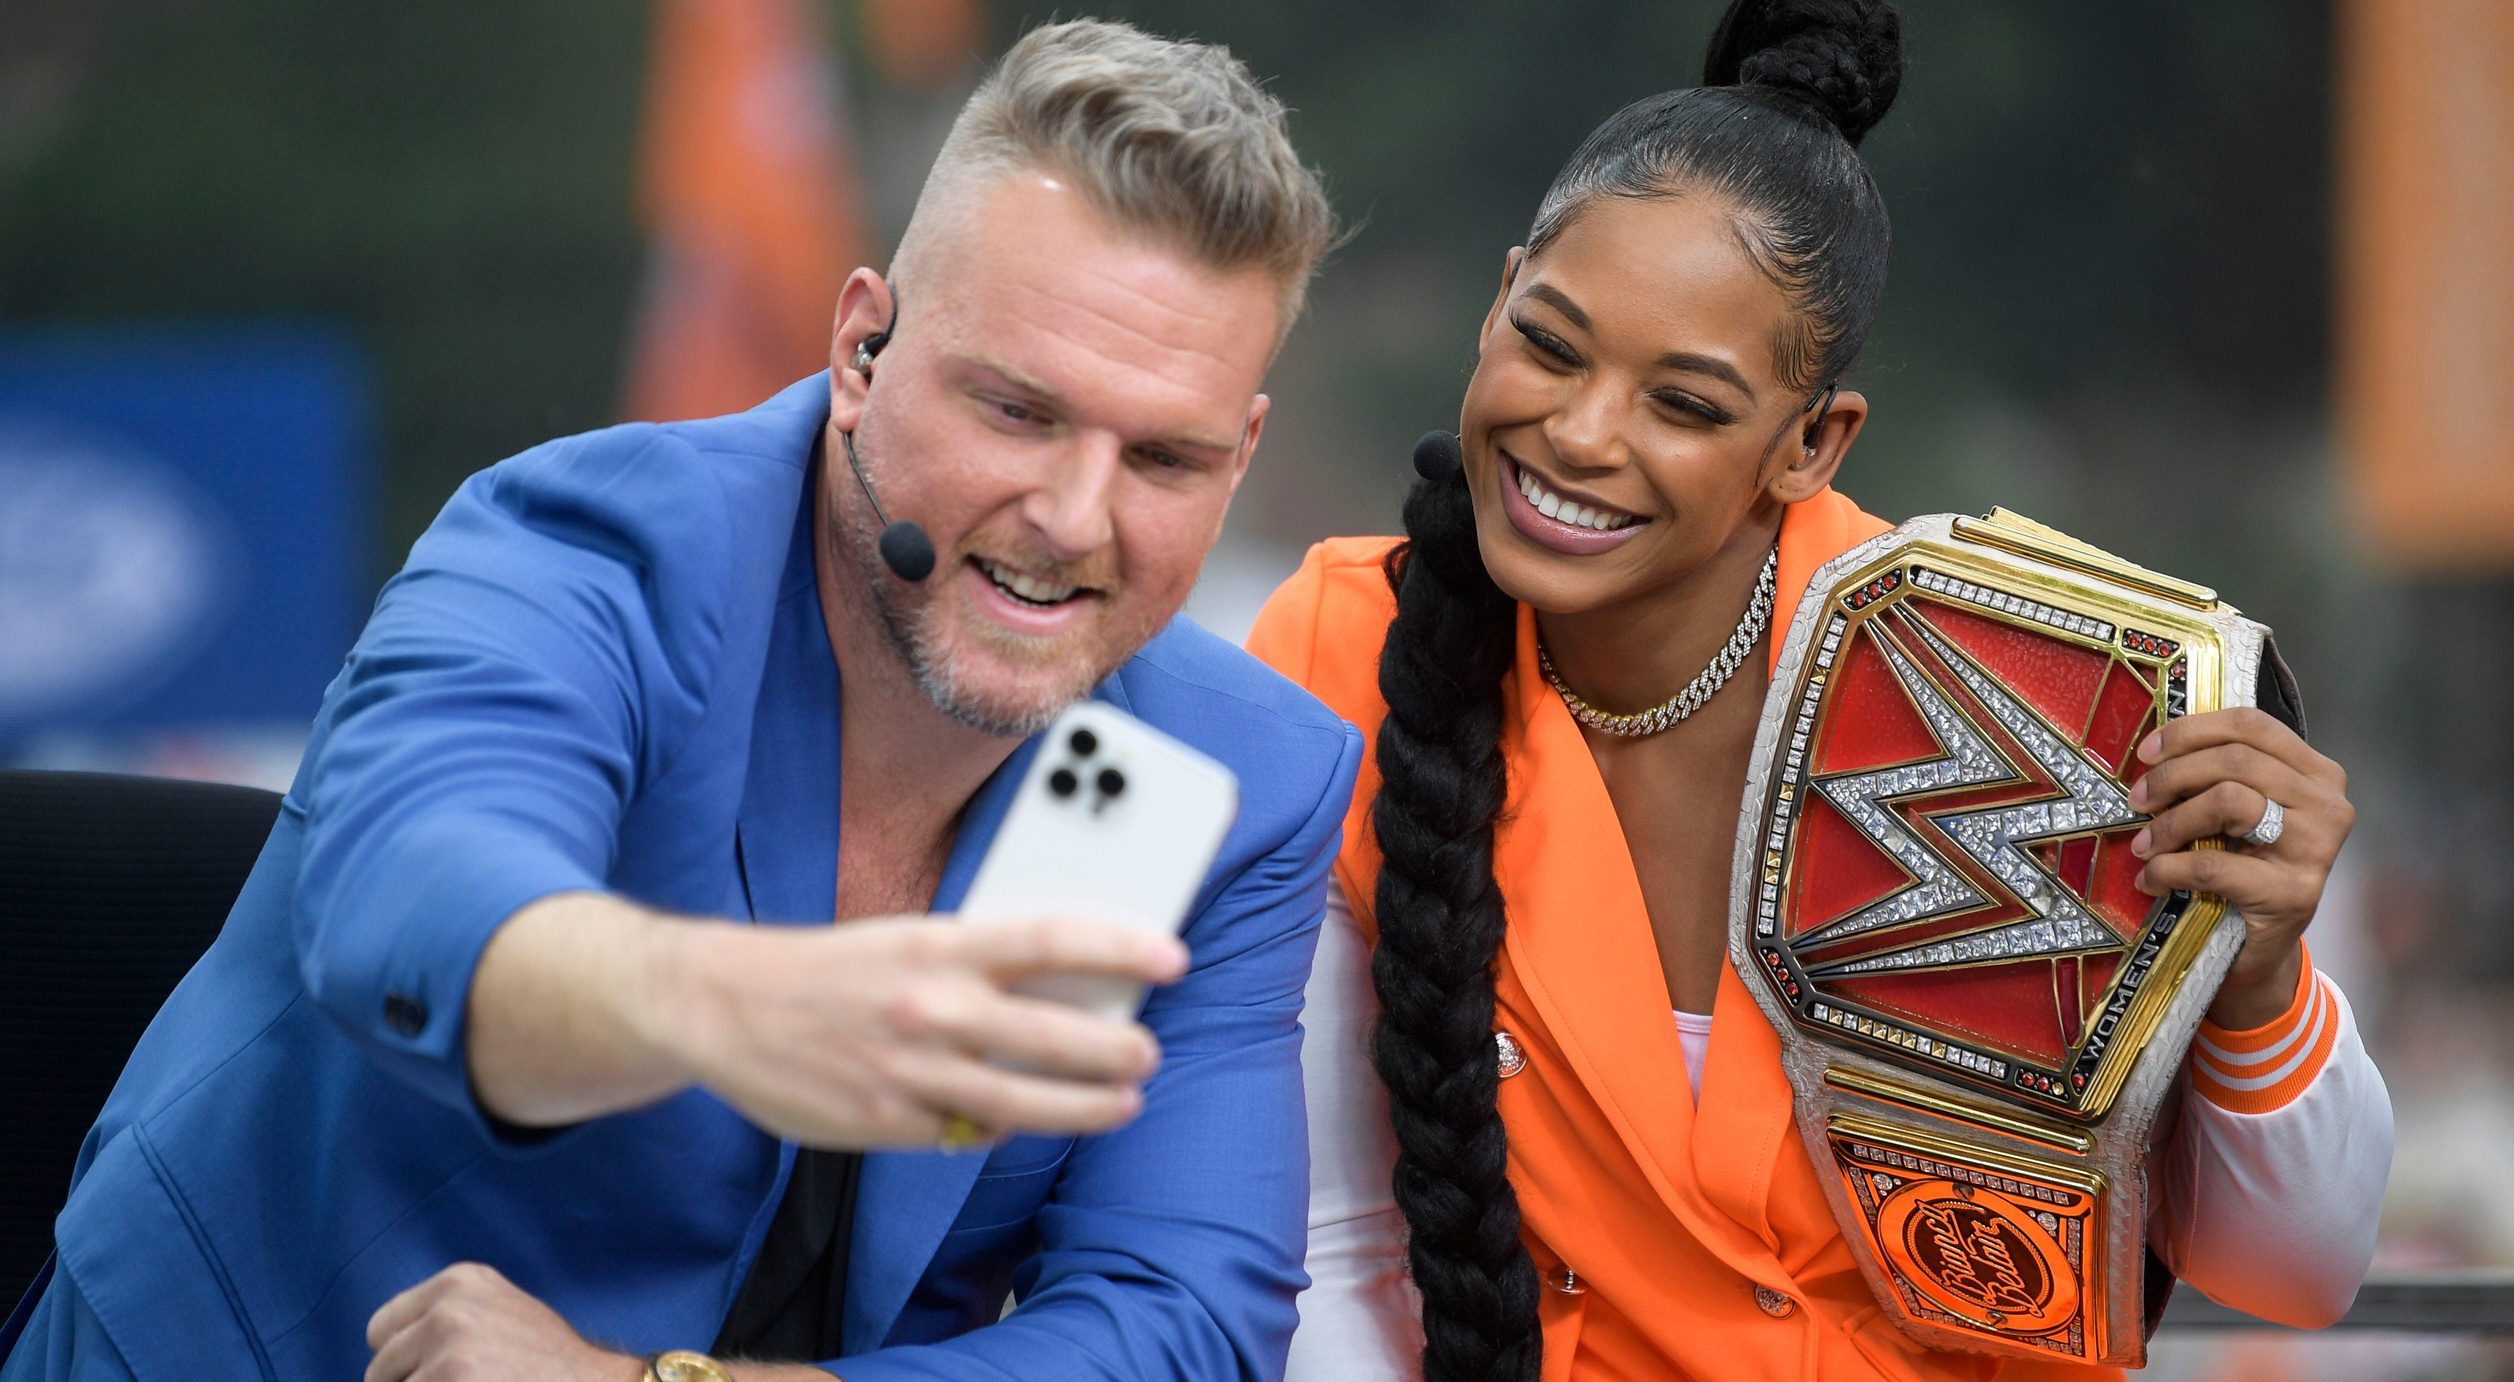 Pat McAfee and Bianca Belair take a selfie photo together at the ESPN College GameDay stage outside of Ayres Hall on the University of Tennessee campus in Knoxville, Tenn. on Saturday, Sept. 24, 2022. The flagship ESPN college football pregame show returned for the tenth time to Knoxville as the No. 12 Vols hosted the No. 22 Gators.